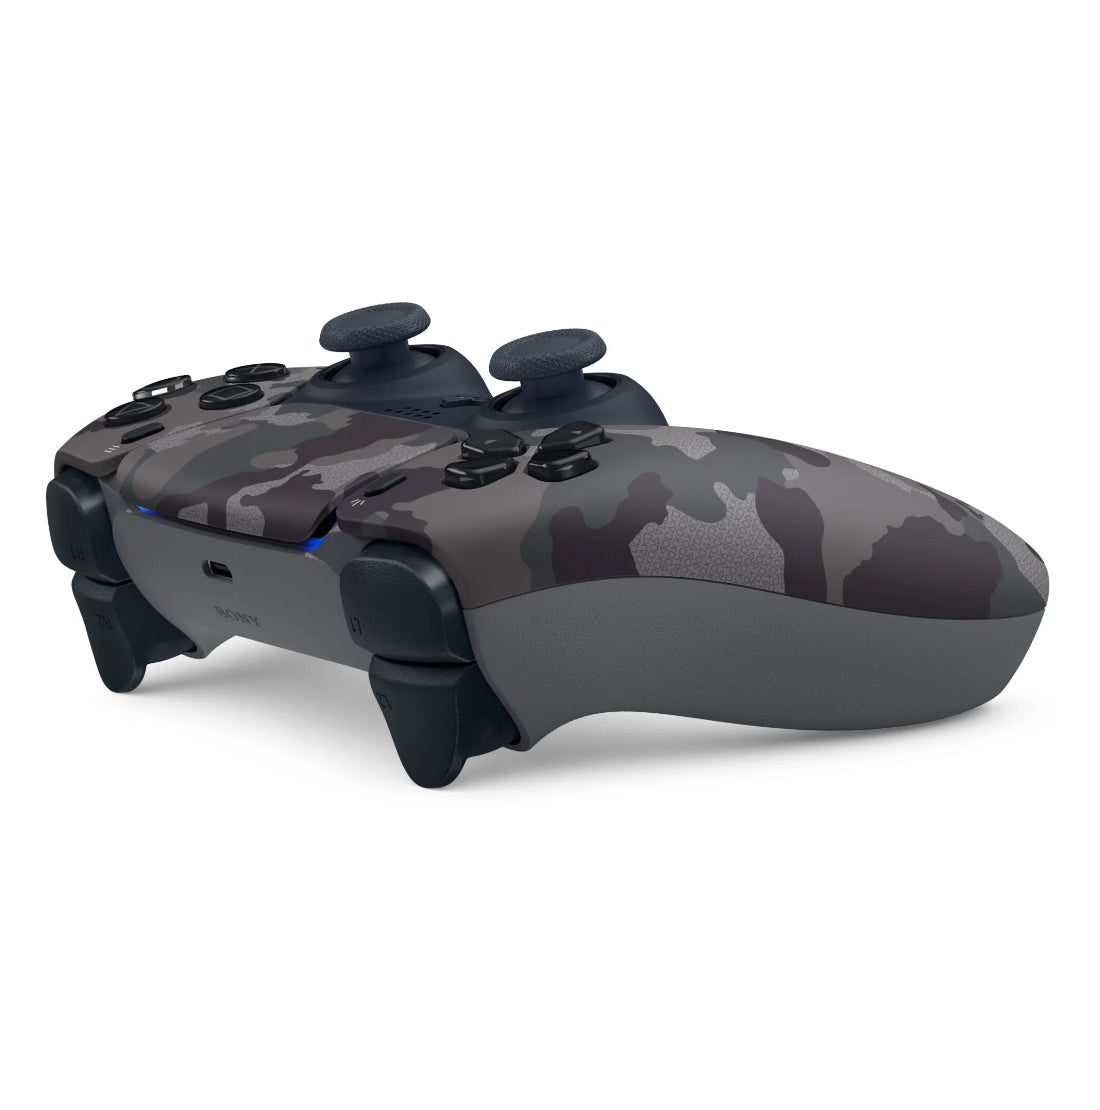 Sony Playstation 5 Digital Edition with Extra Gray Camo Controller and QuickType 2.0 Controller Keypad Bundle - Pro-Distributing